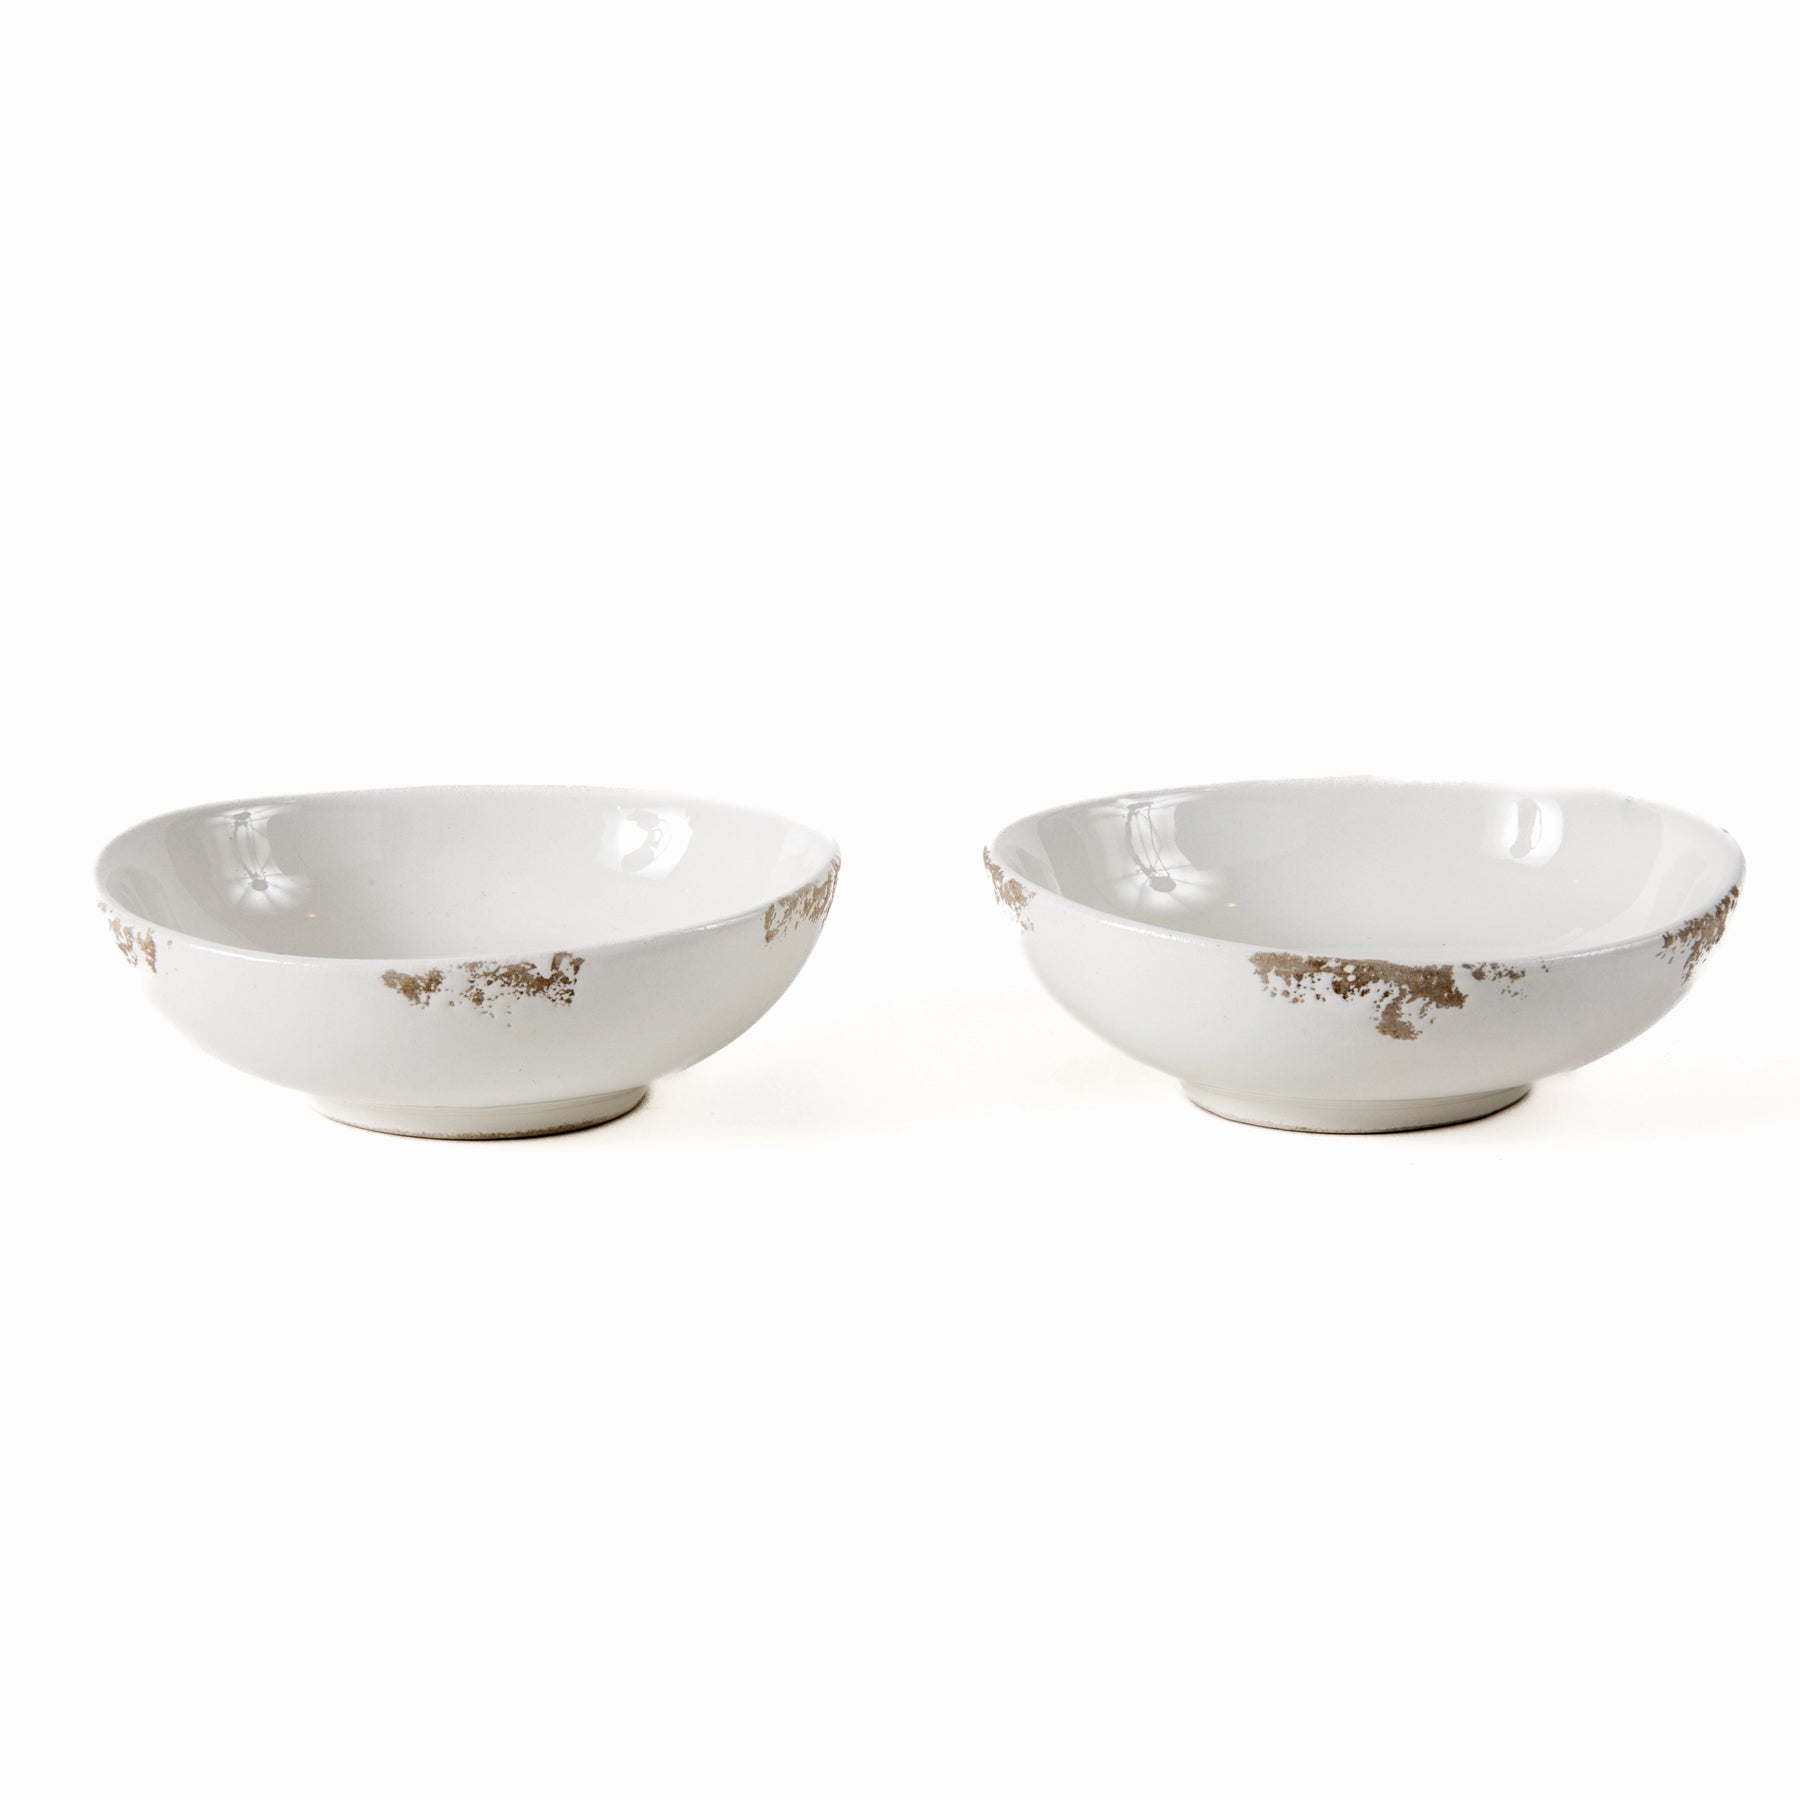 Scavo Off White Small Oval Bowl - Set of 2